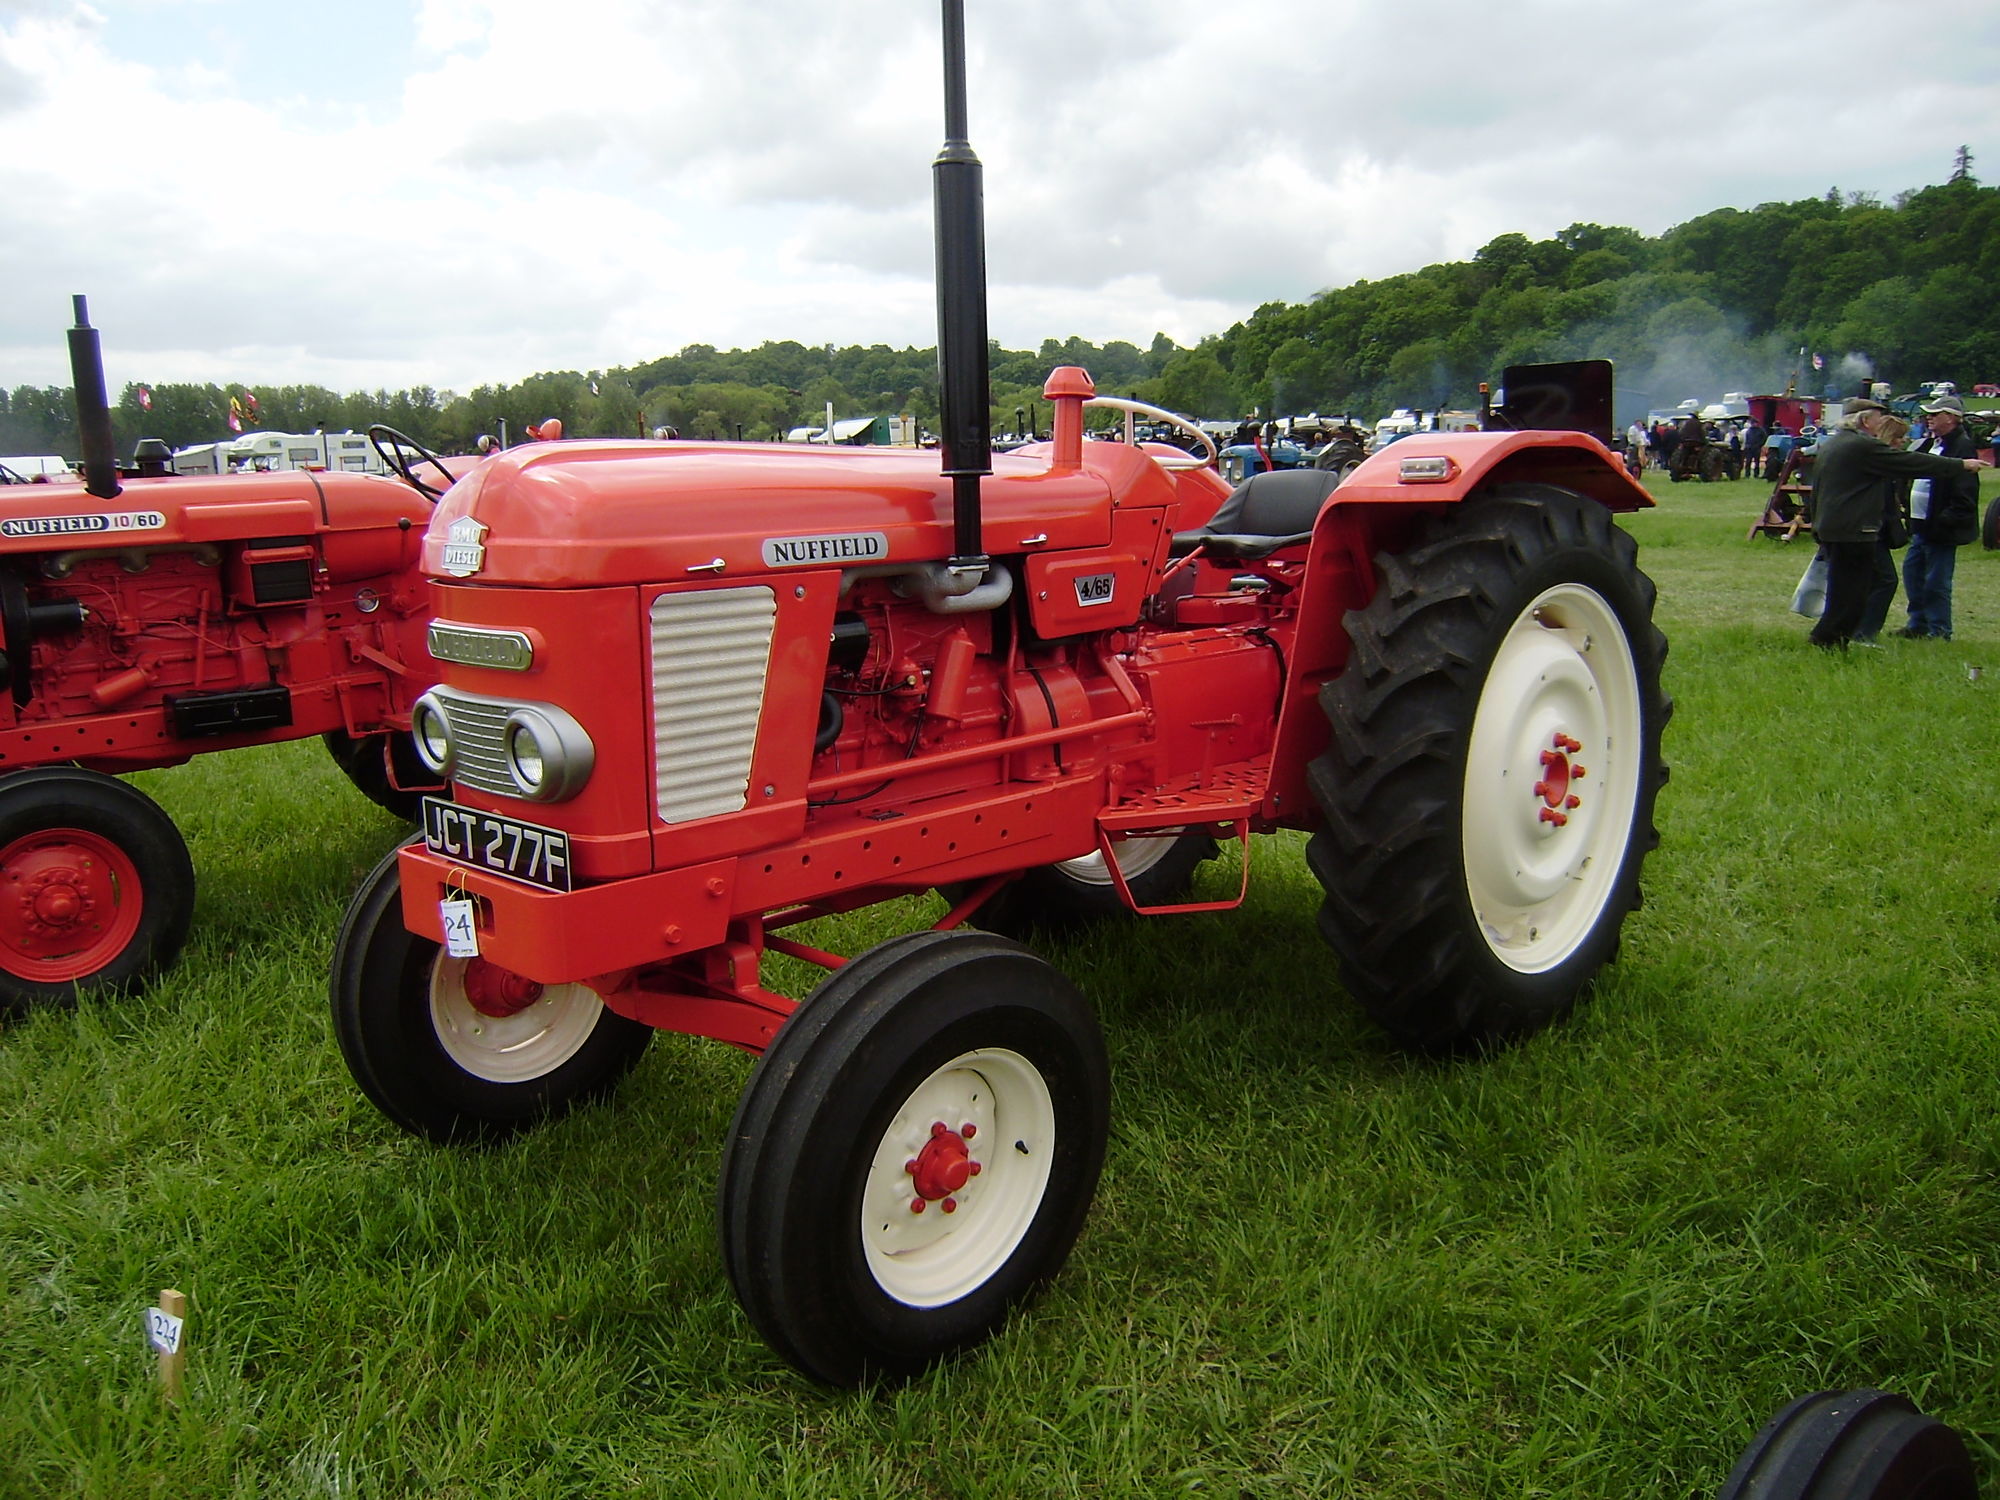 Category:465 (model number) | Tractor & Construction Plant Wiki ...